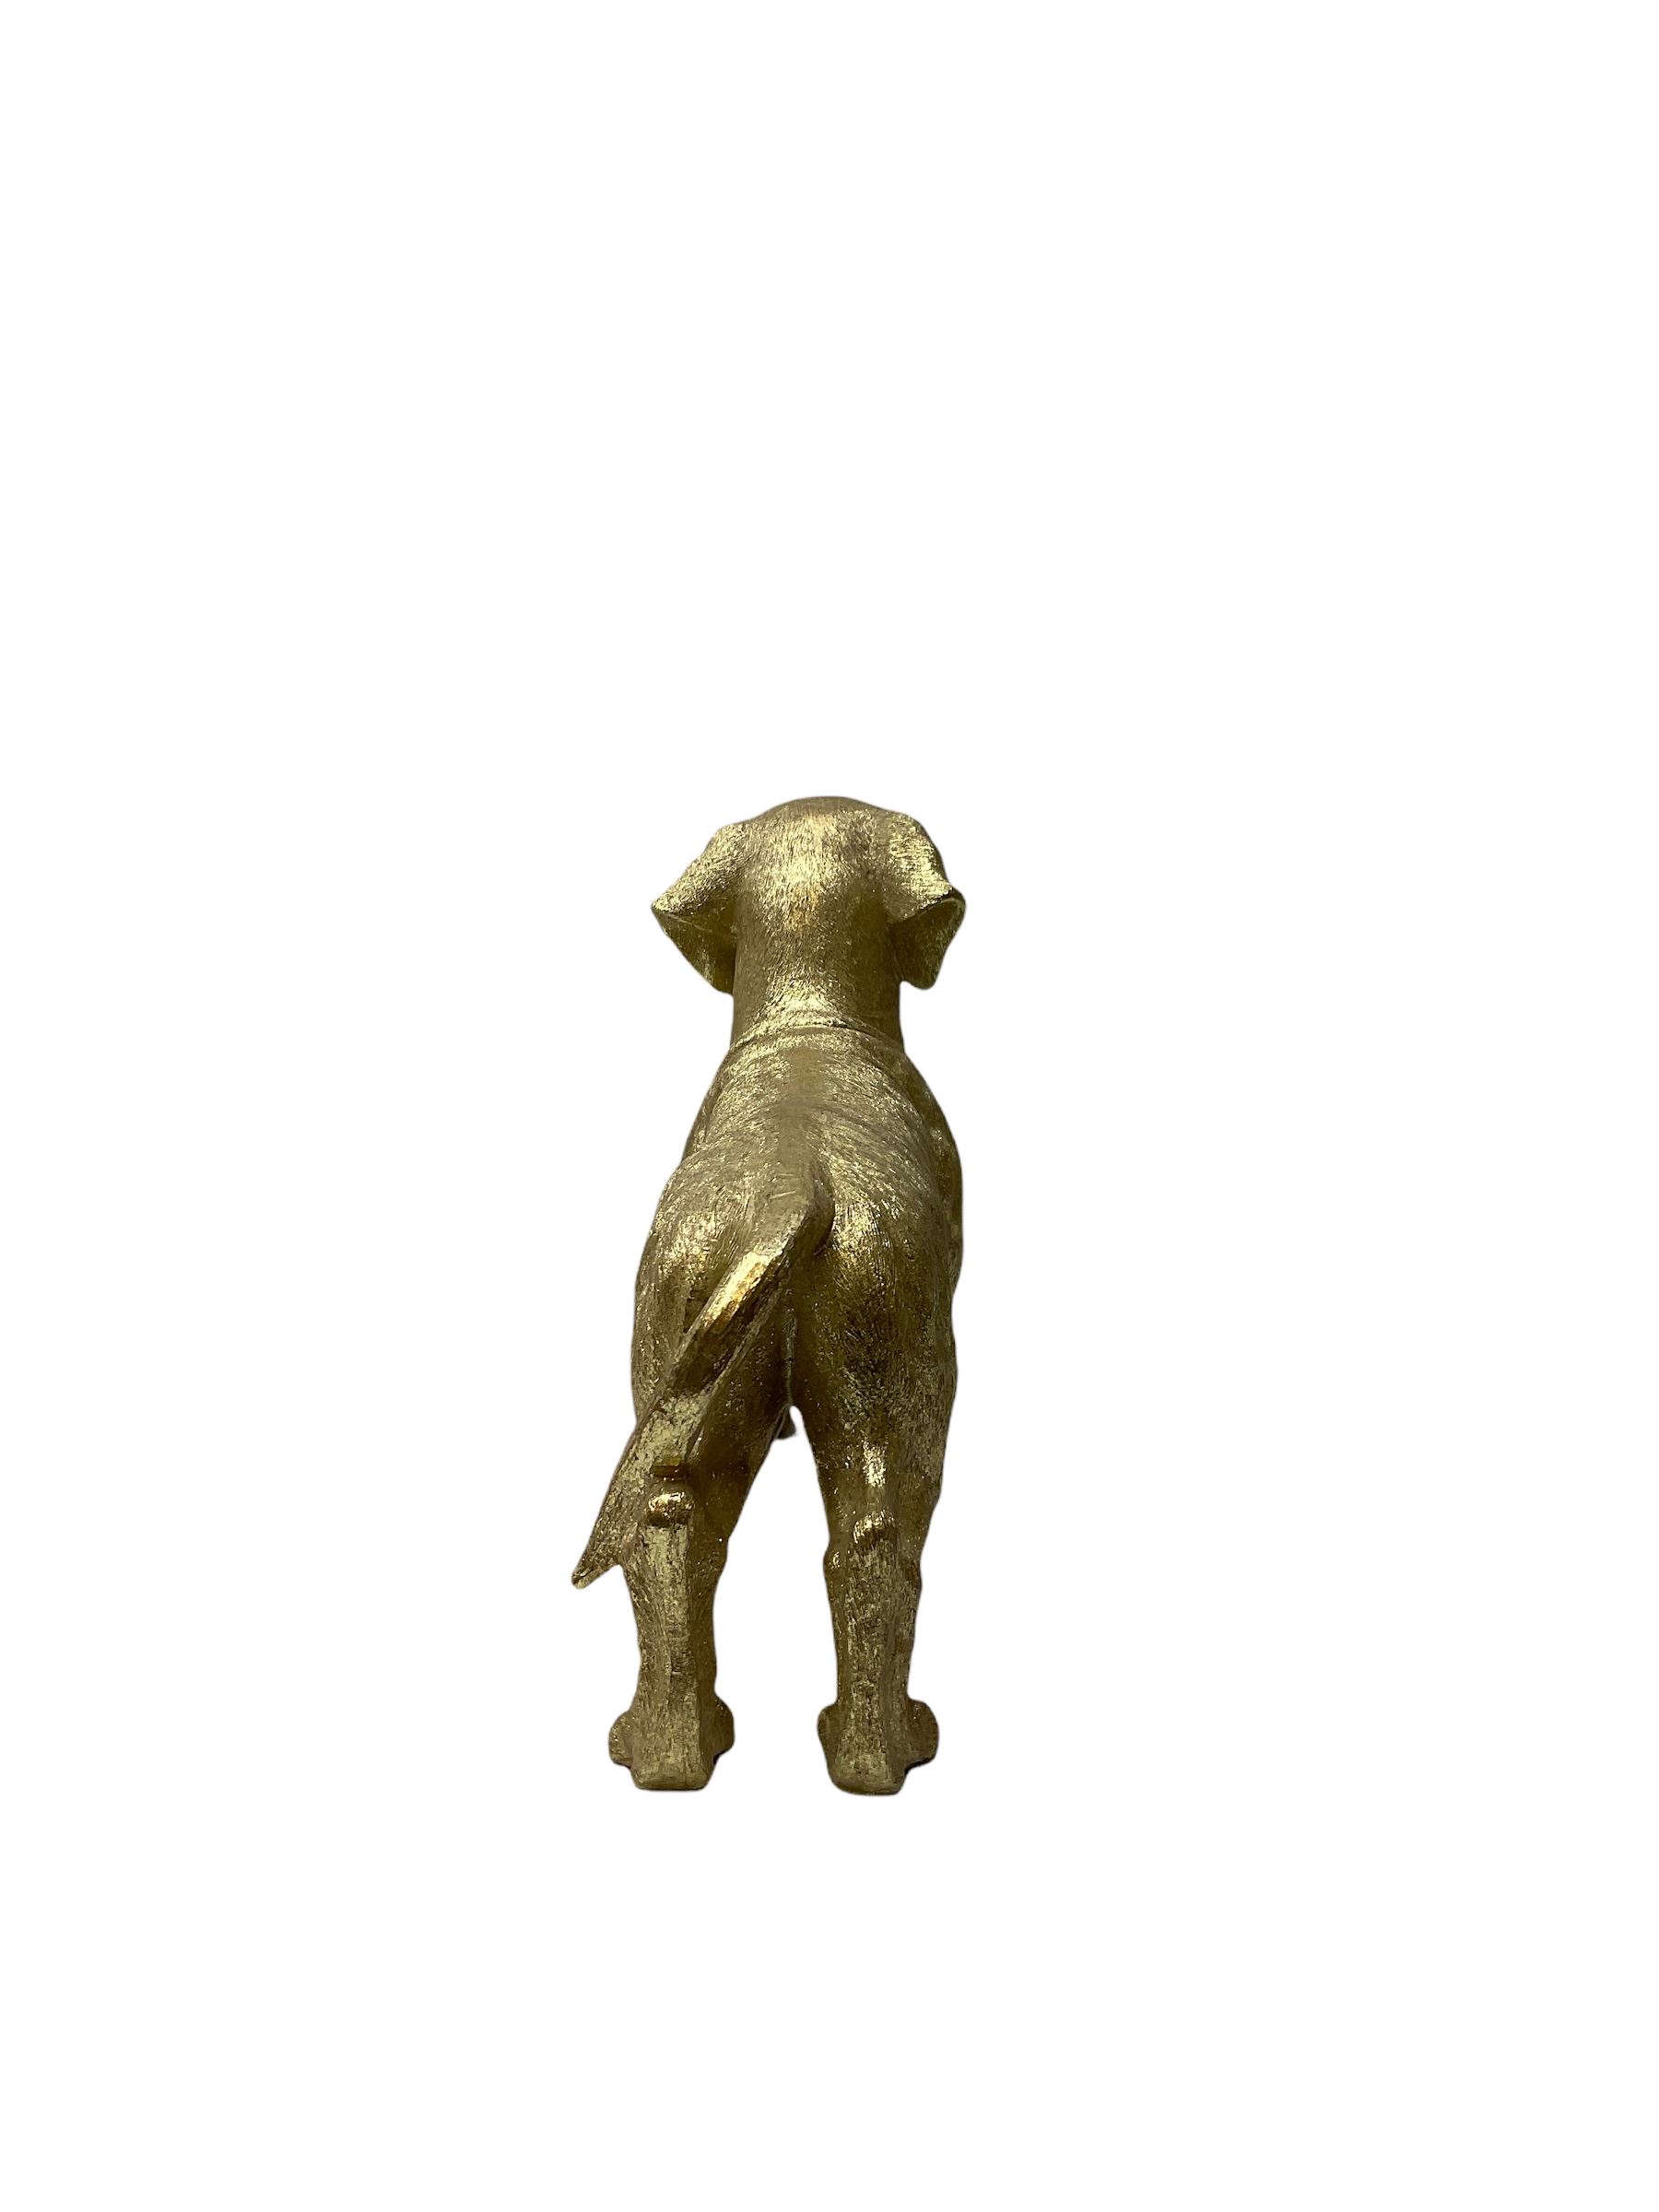 Composite metallic gold model of a Dachshund - Image 3 of 4